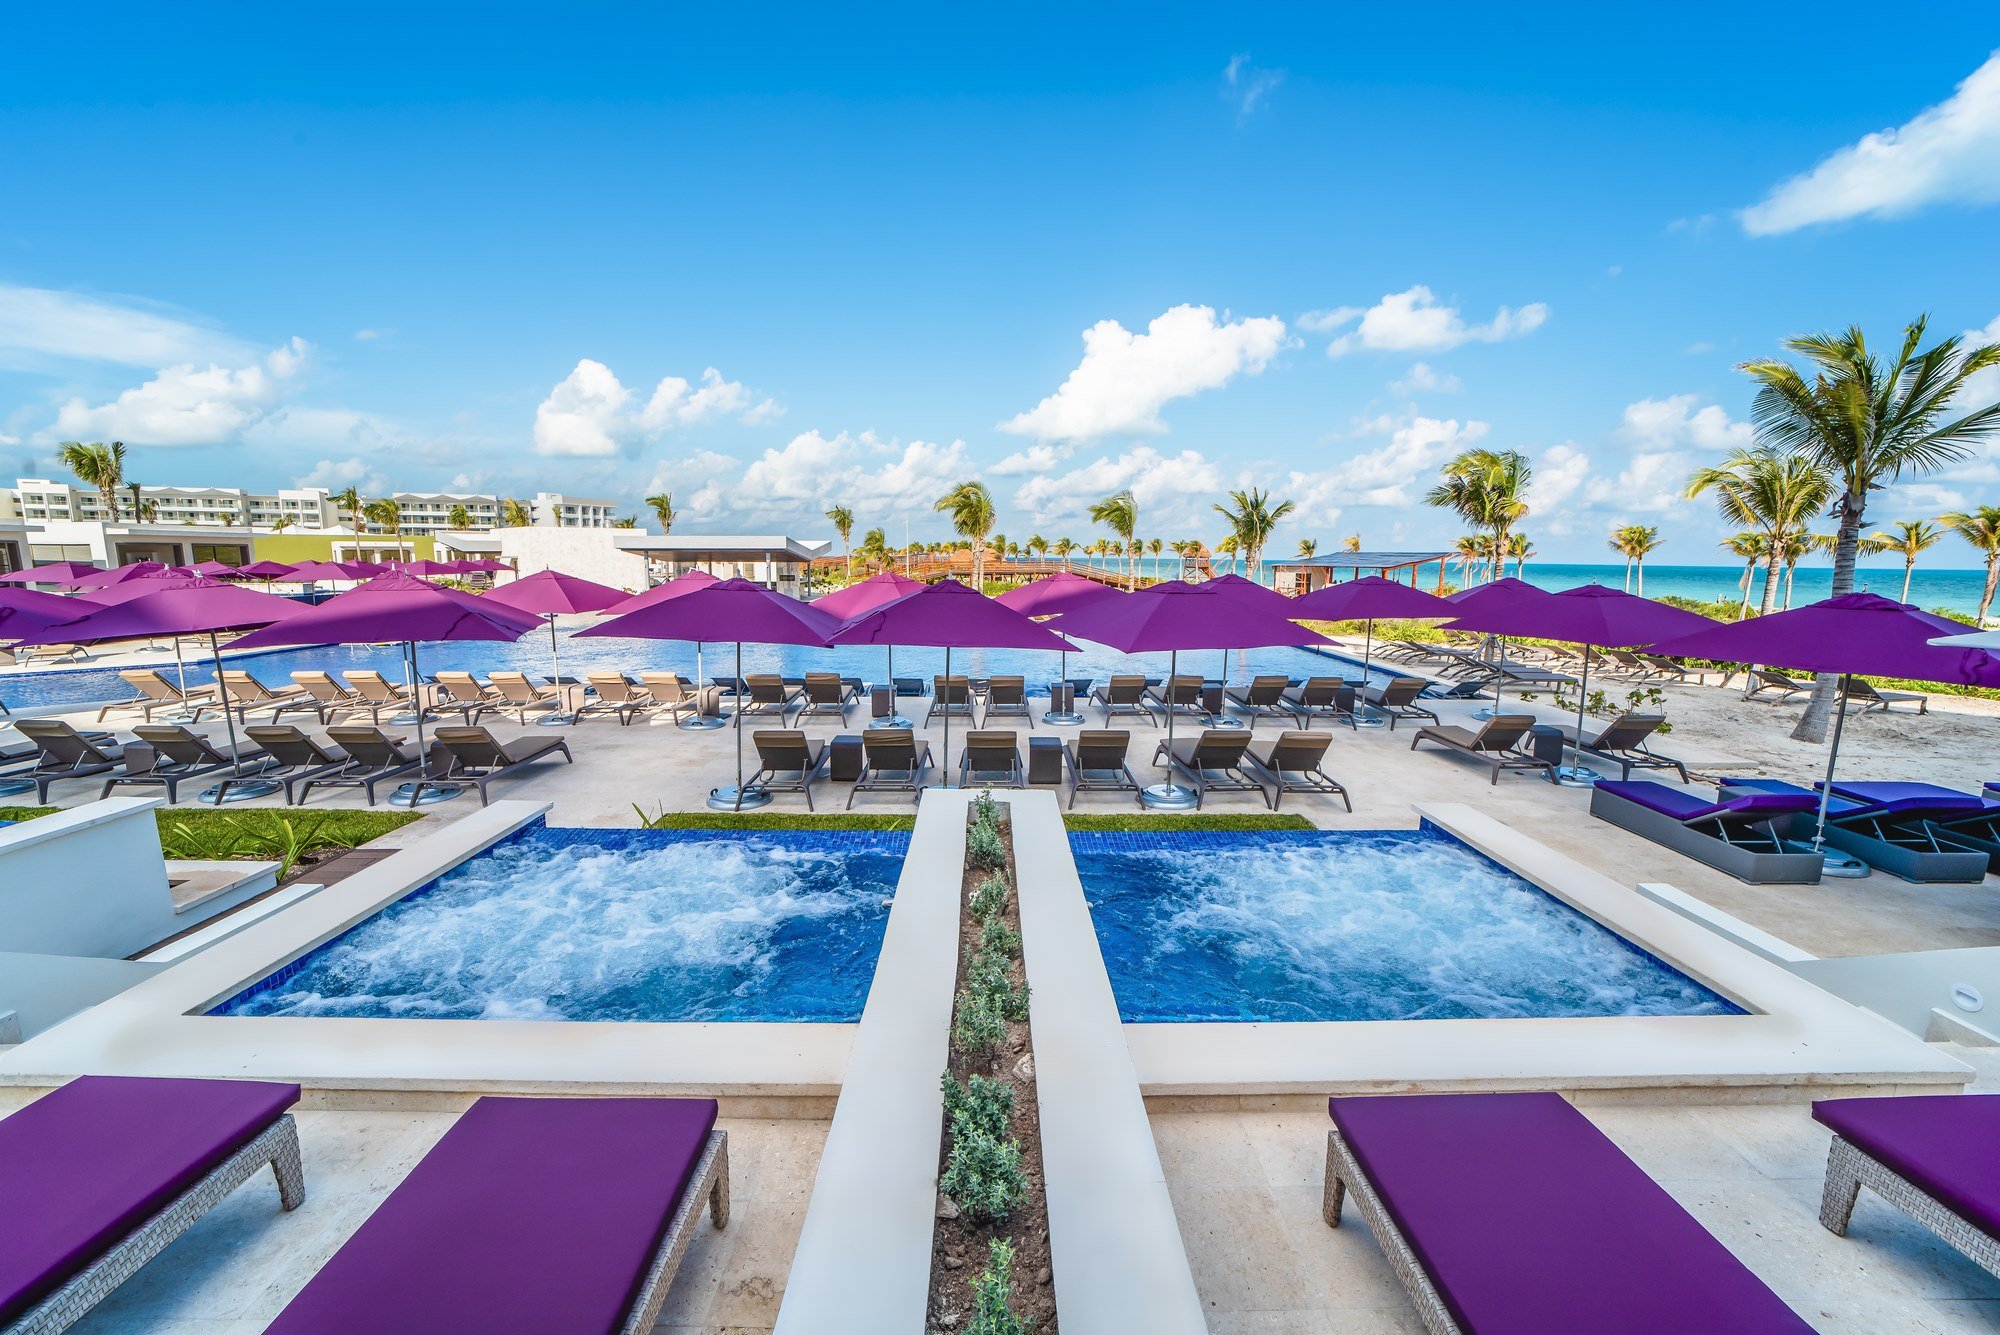 Planet Hollywood Cancun - Resort Preview Pictures 41.jpg